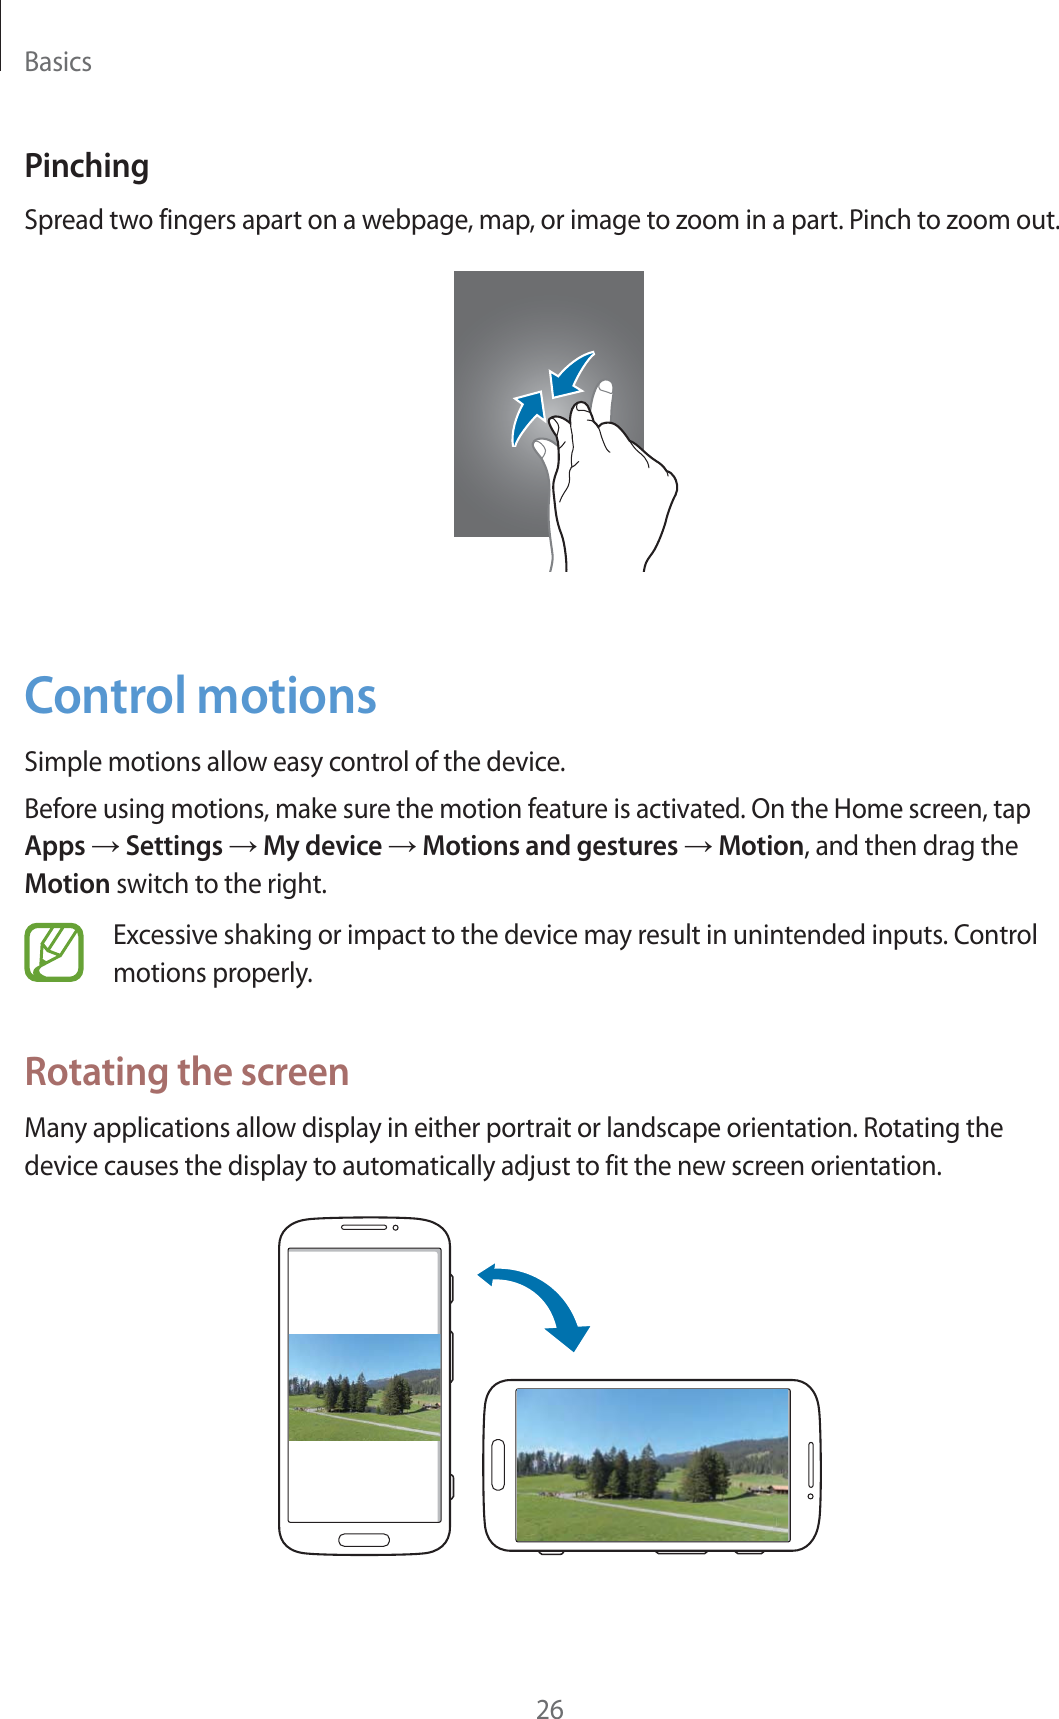 Basics26PinchingSpread two fingers apart on a webpage, map, or image to zoom in a part. Pinch to zoom out.Control motionsSimple motions allow easy control of the device.Before using motions, make sure the motion feature is activated. On the Home screen, tap Apps  Settings  My device  Motions and gestures  Motion, and then drag the Motion switch to the right.Excessive shaking or impact to the device may result in unintended inputs. Control motions properly.Rotating the screenMany applications allow display in either portrait or landscape orientation. Rotating the device causes the display to automatically adjust to fit the new screen orientation.